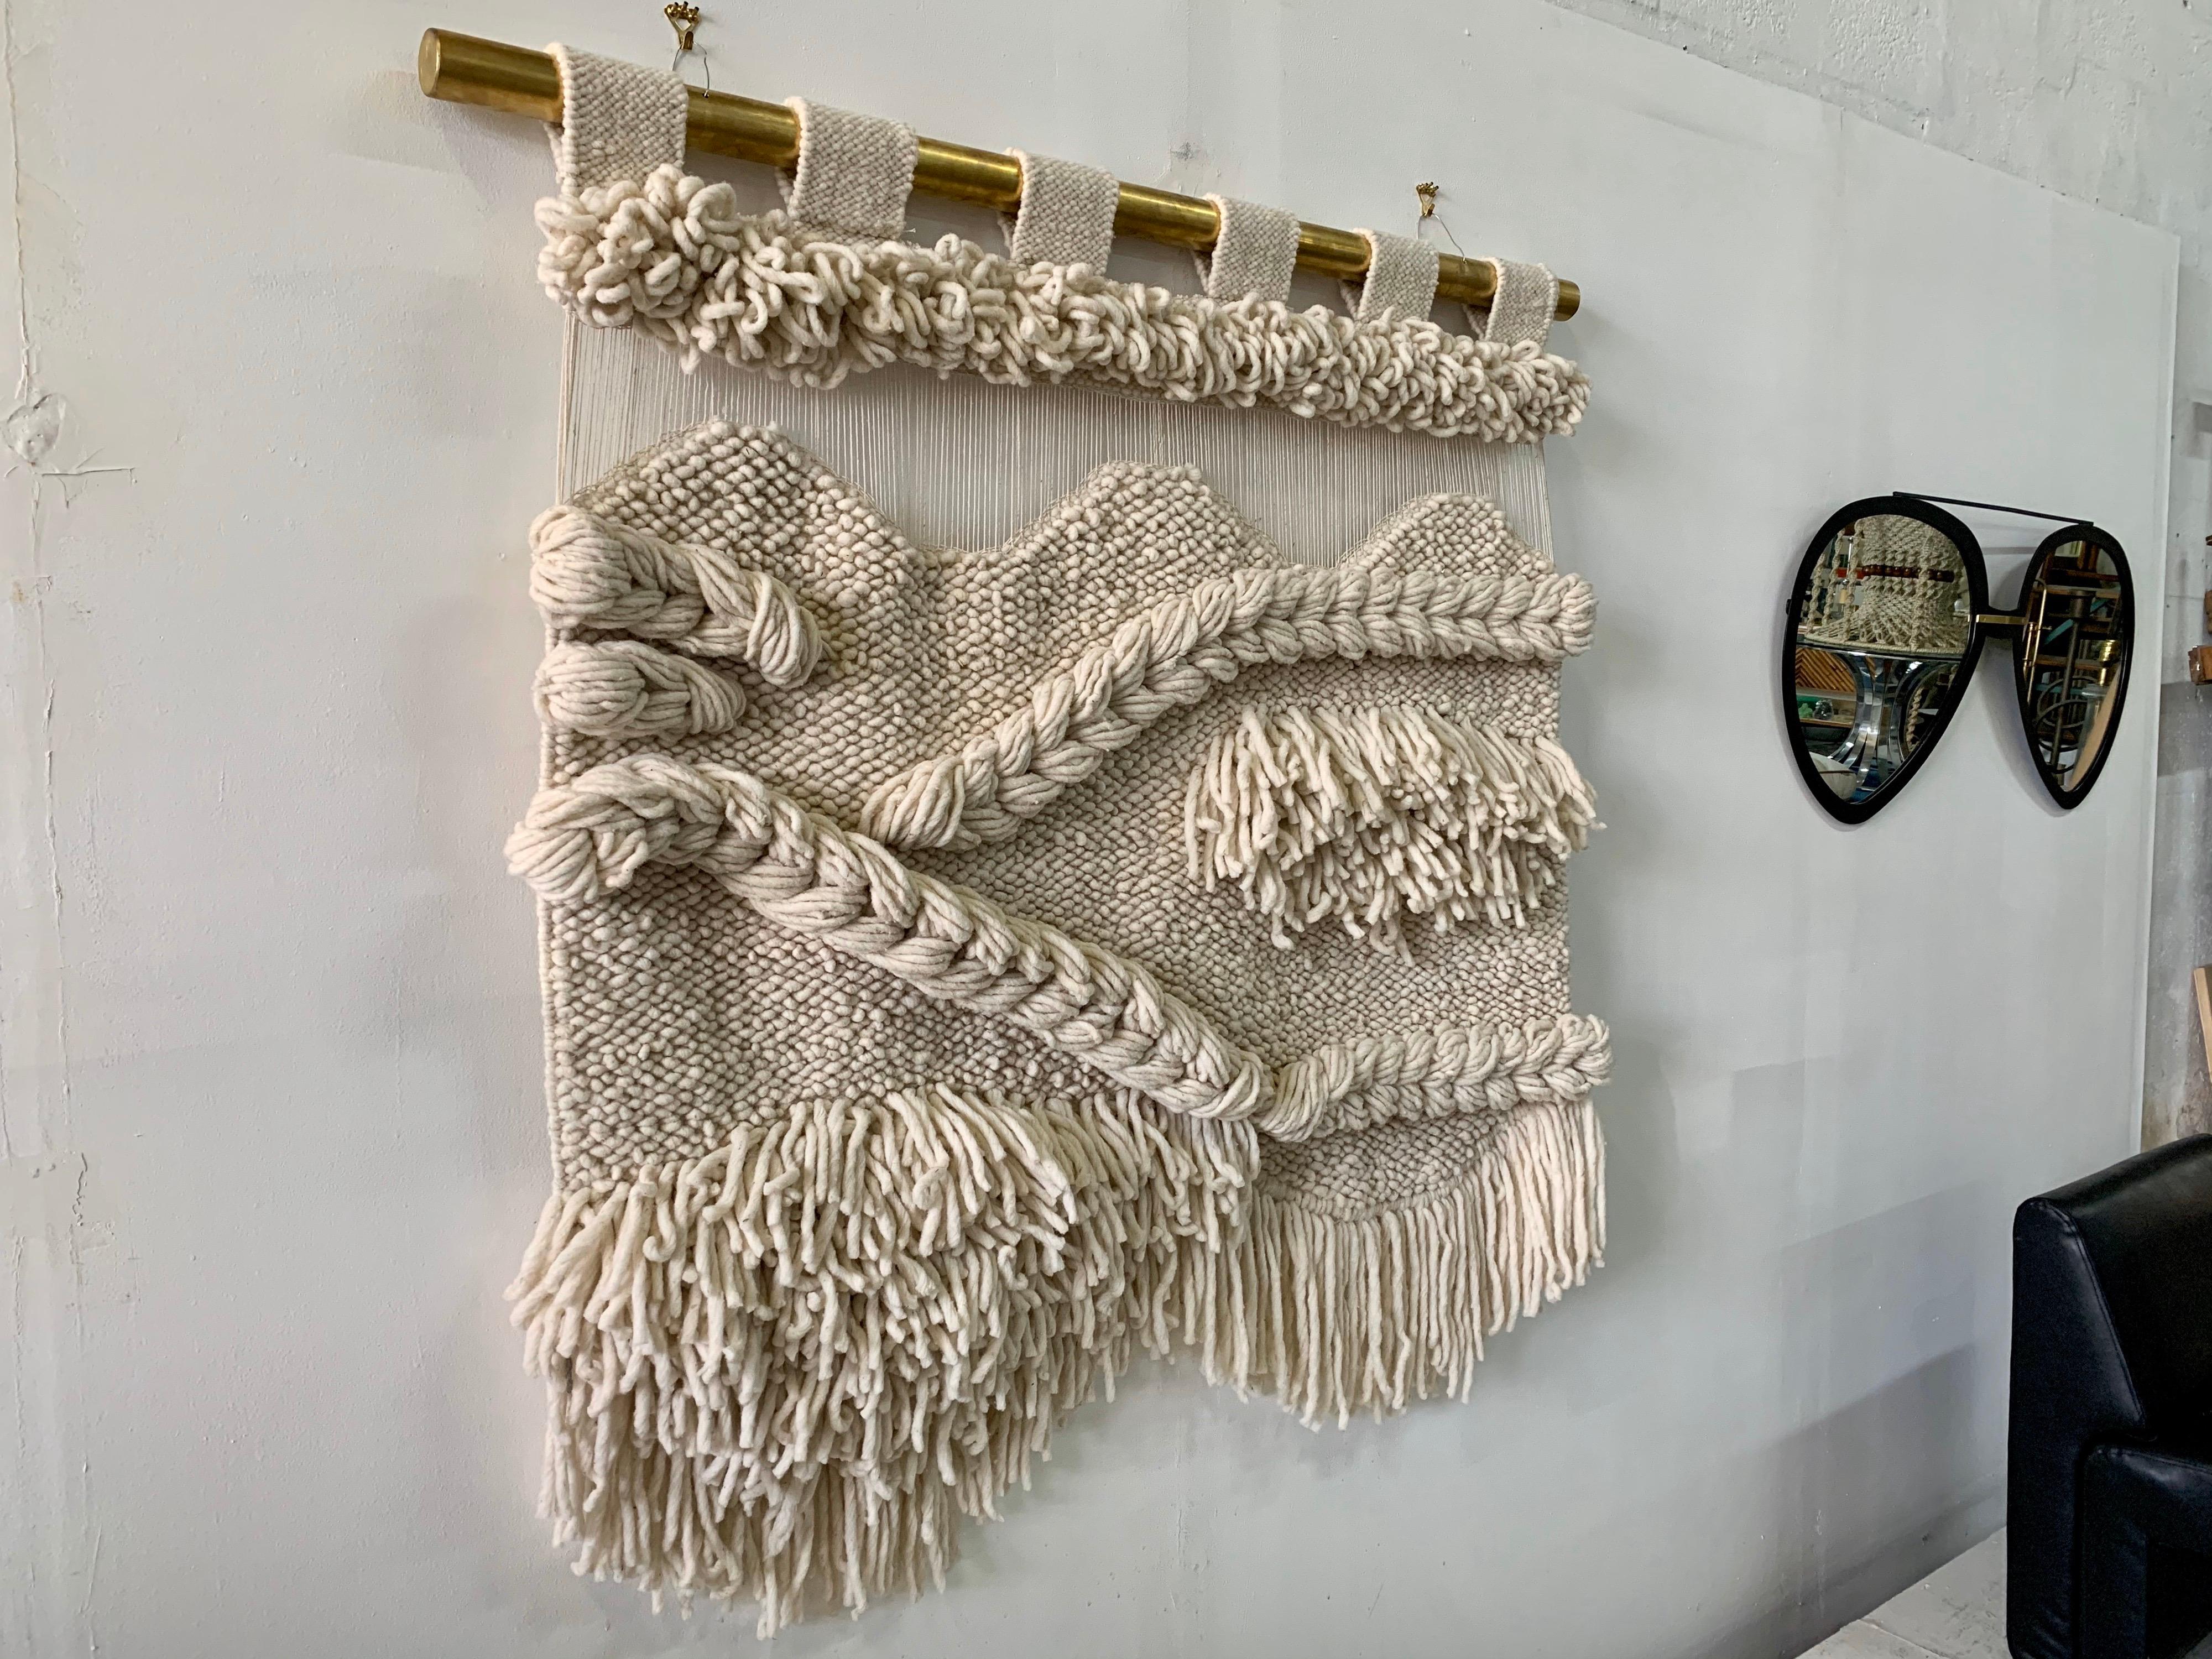 All natural tapestry in non-died wool textile, woven by hand in this intricate and elegant design. The brass hanging rod has been custom designed for this piece for the best possible displaying and hanging. Details include a delicate string design